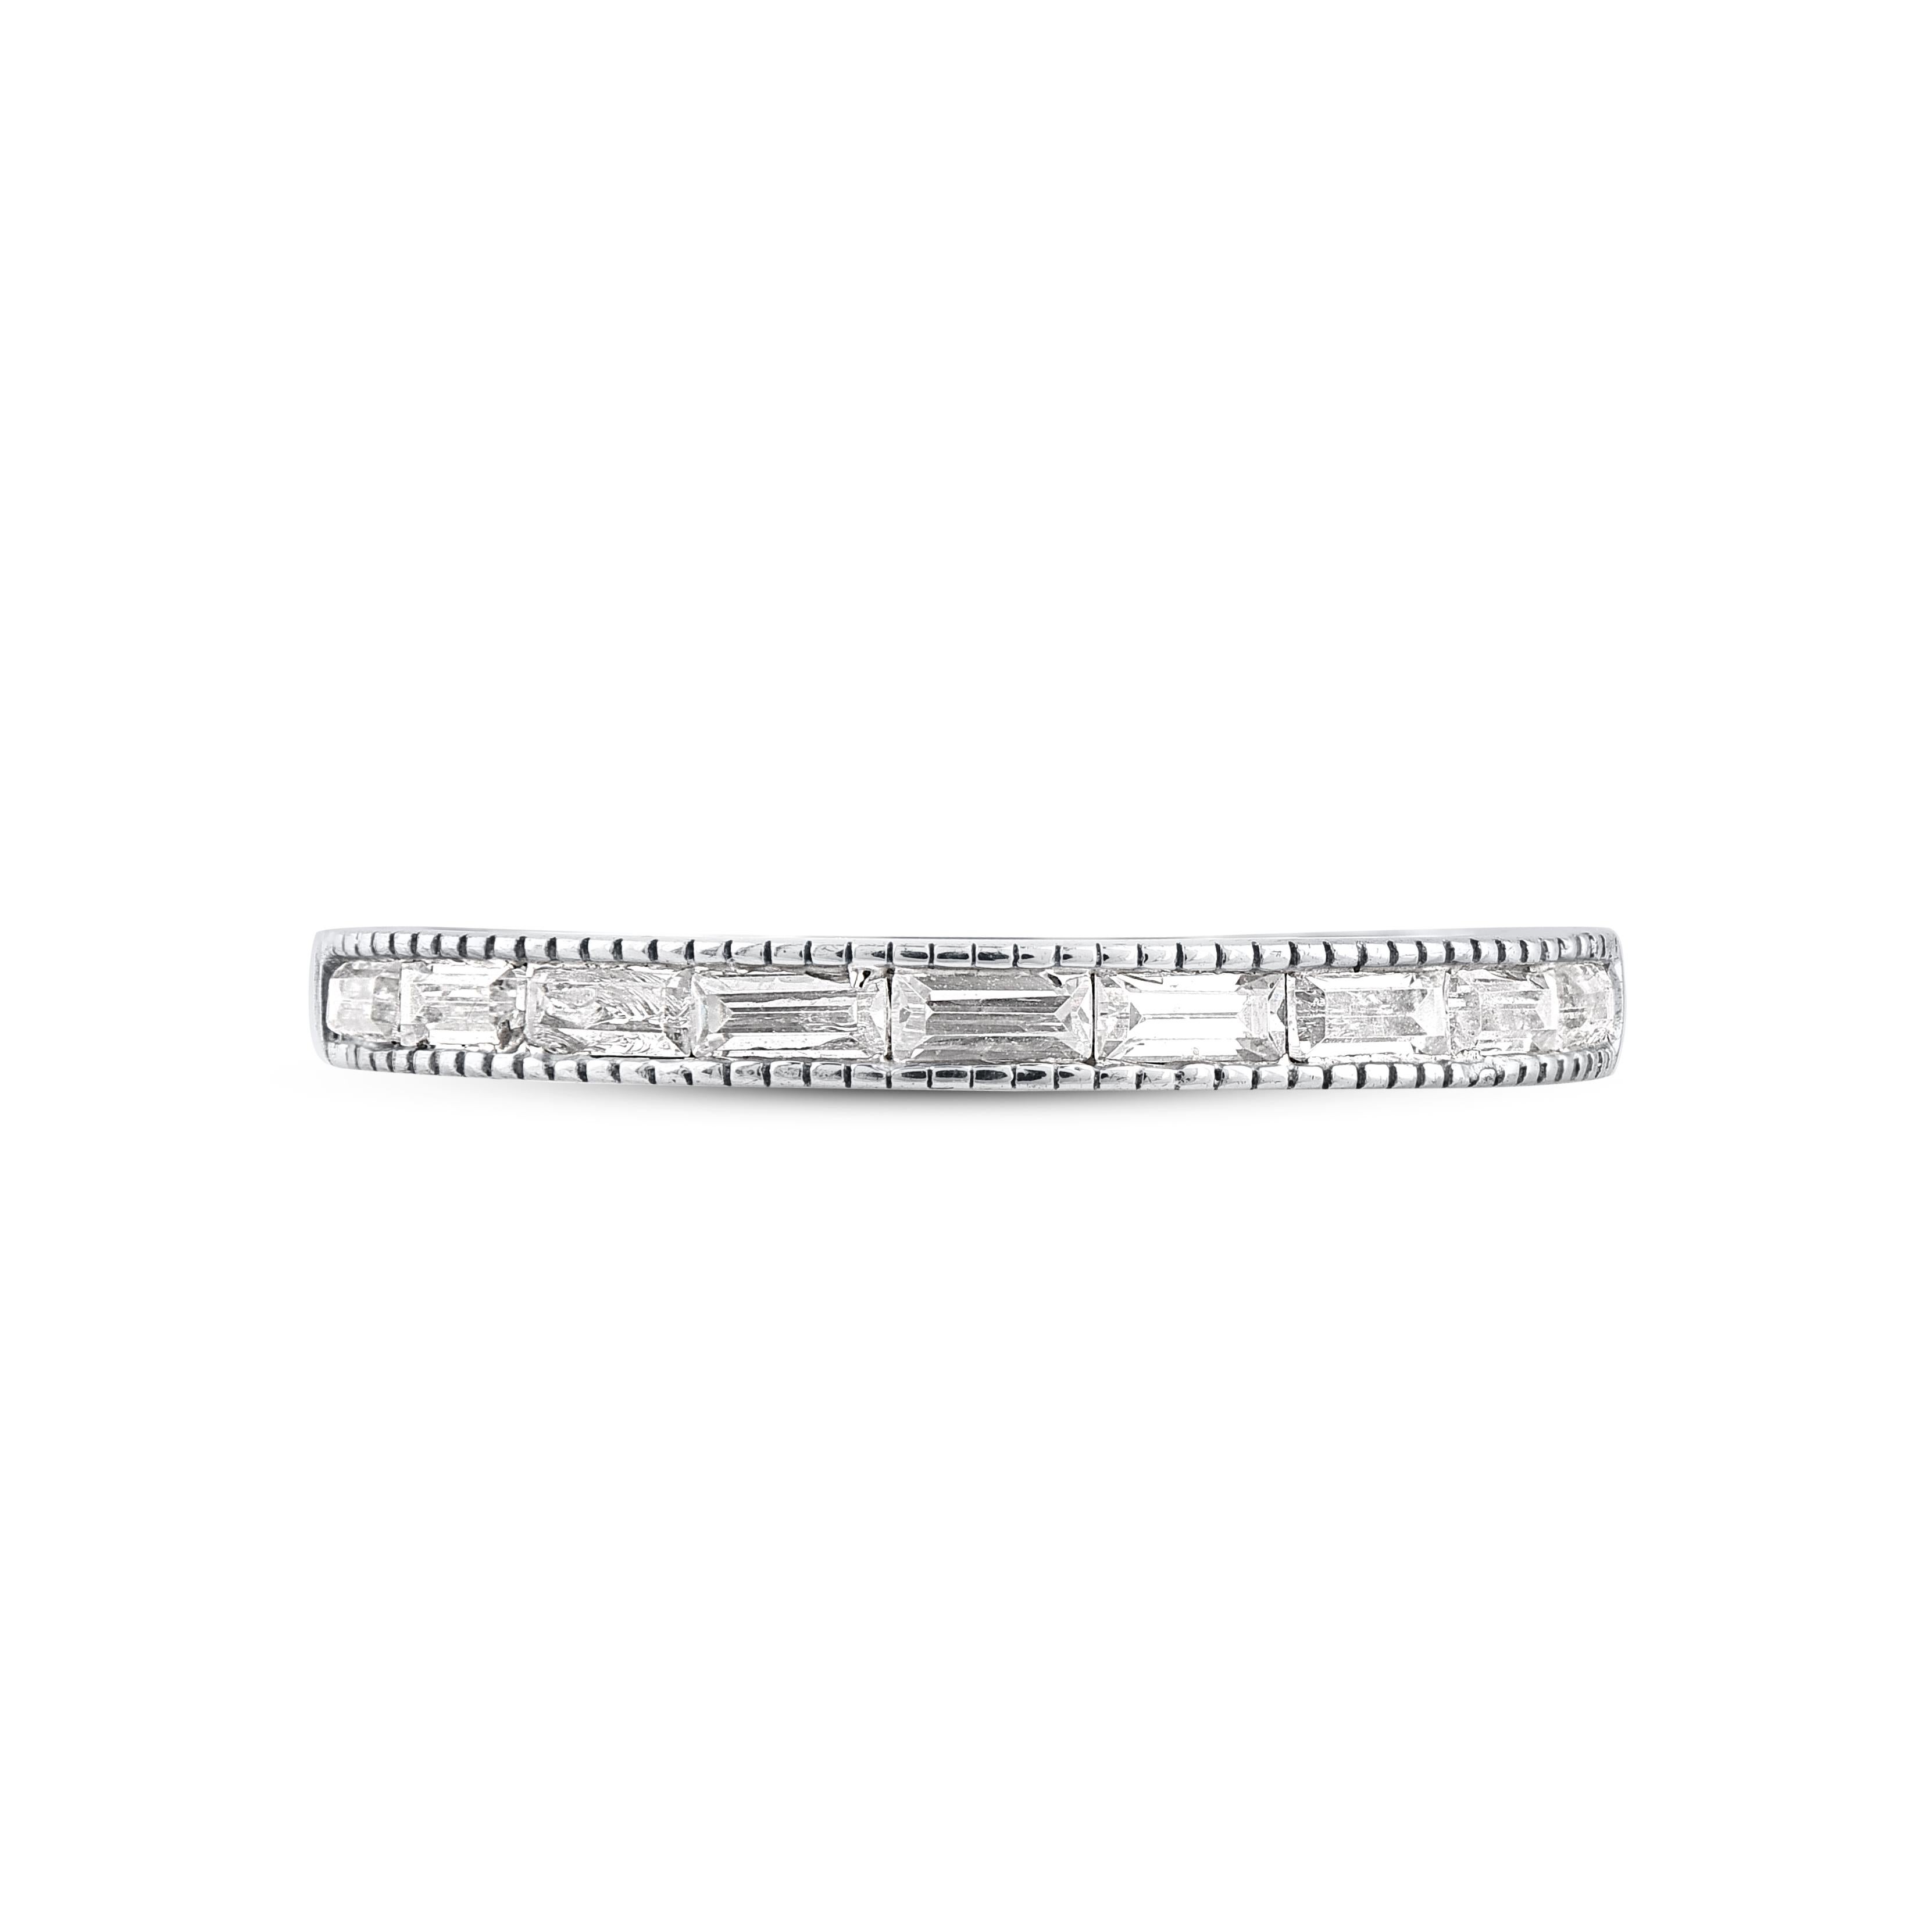 Honor your special day with this exceptional diamond band ring. This band ring features a sparkling 9 baguette diamonds beautifully set in channel setting. The total diamond weight is 0.33 Carat. The diamonds are graded as H-I color and I2 clarity.